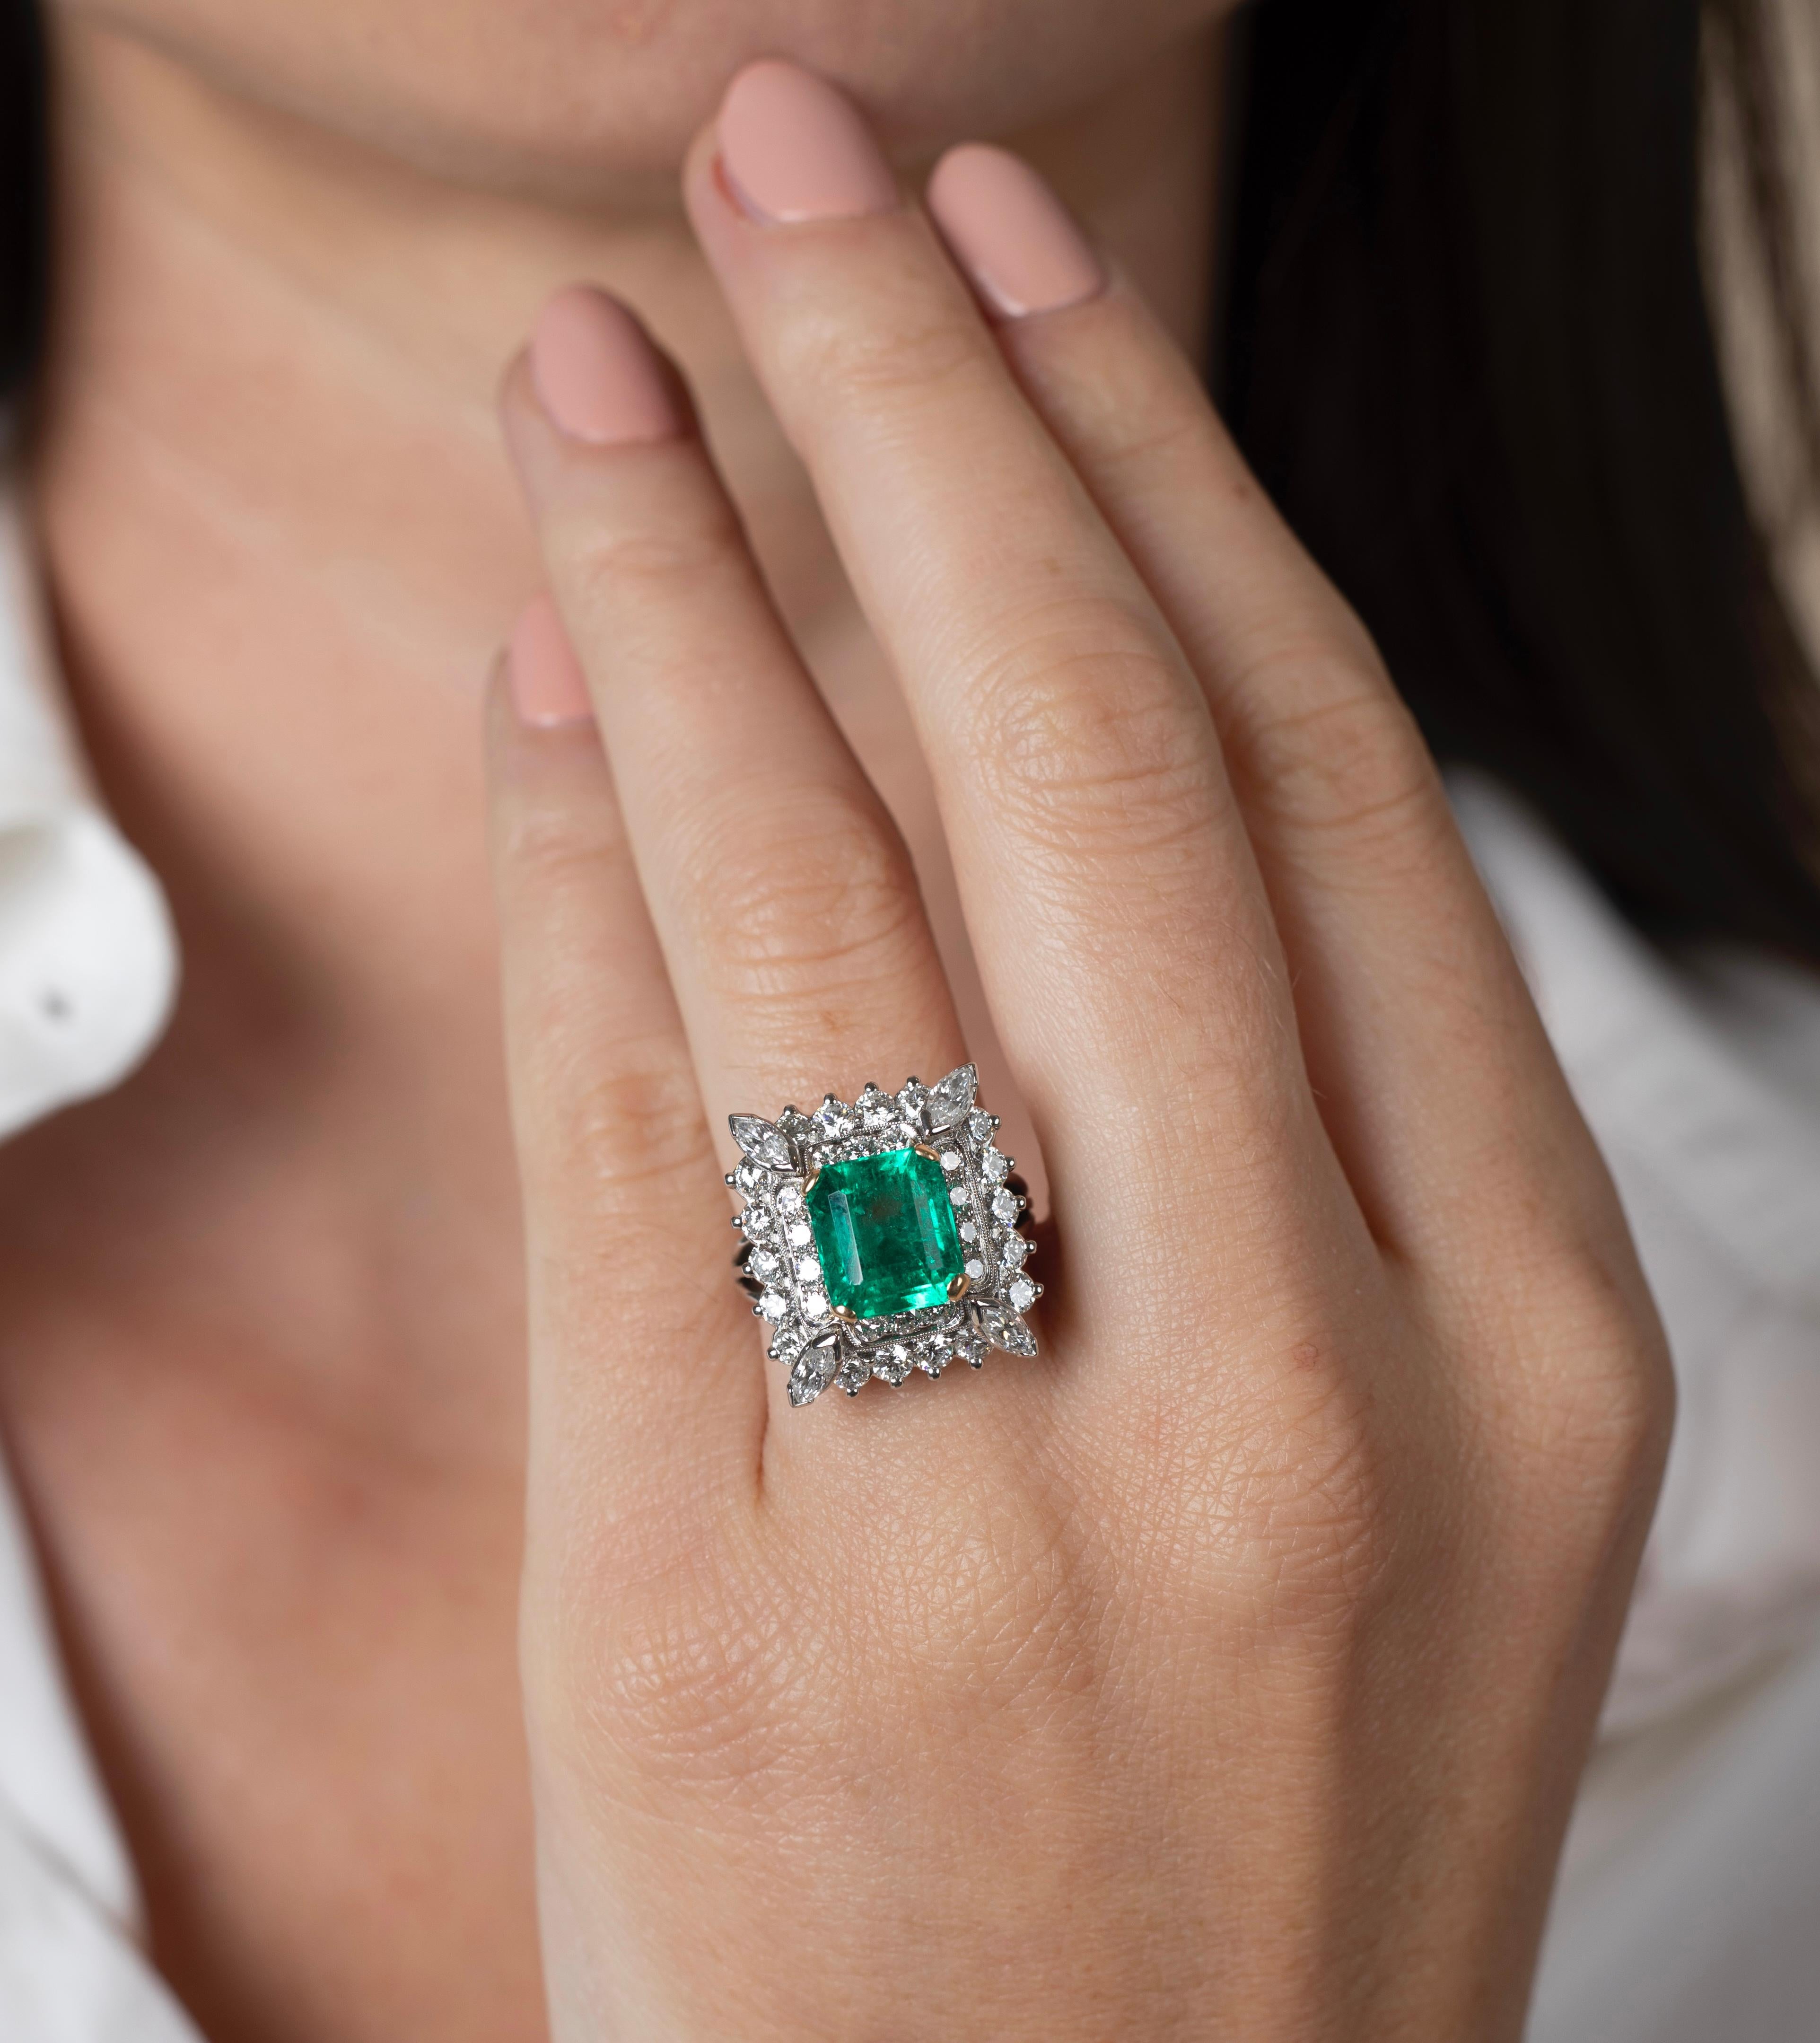 Emerald Cut 3.31 Carat Colombian Emerald & Diamond Halo Cocktail Ring in Platinum Setting For Sale